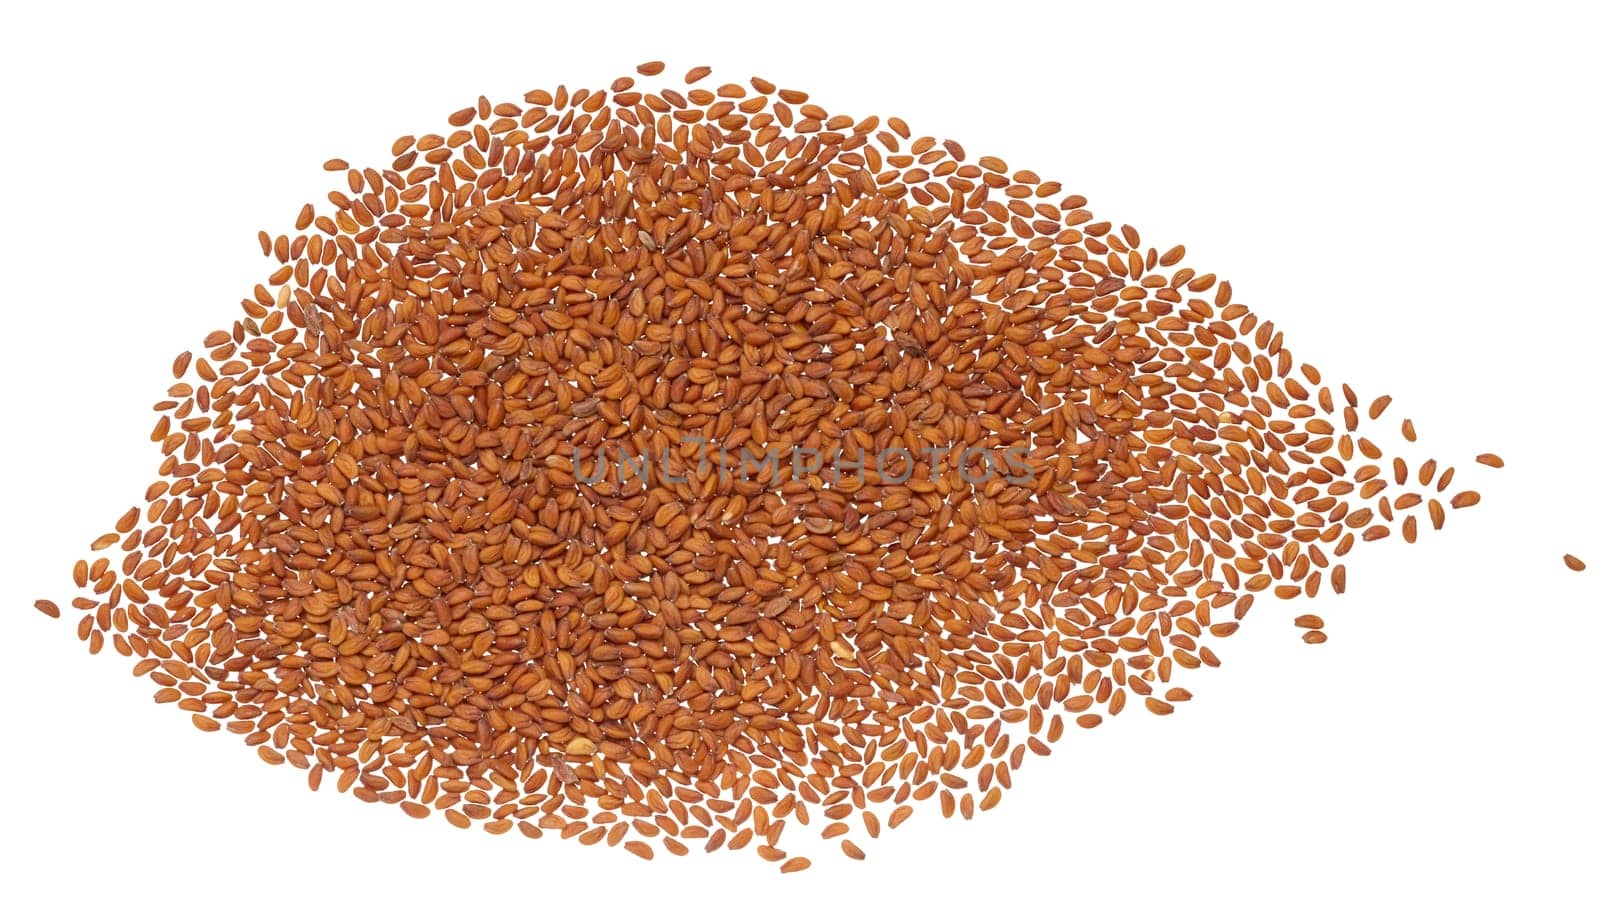 Scattered brown watercress seeds on isolated background, top view